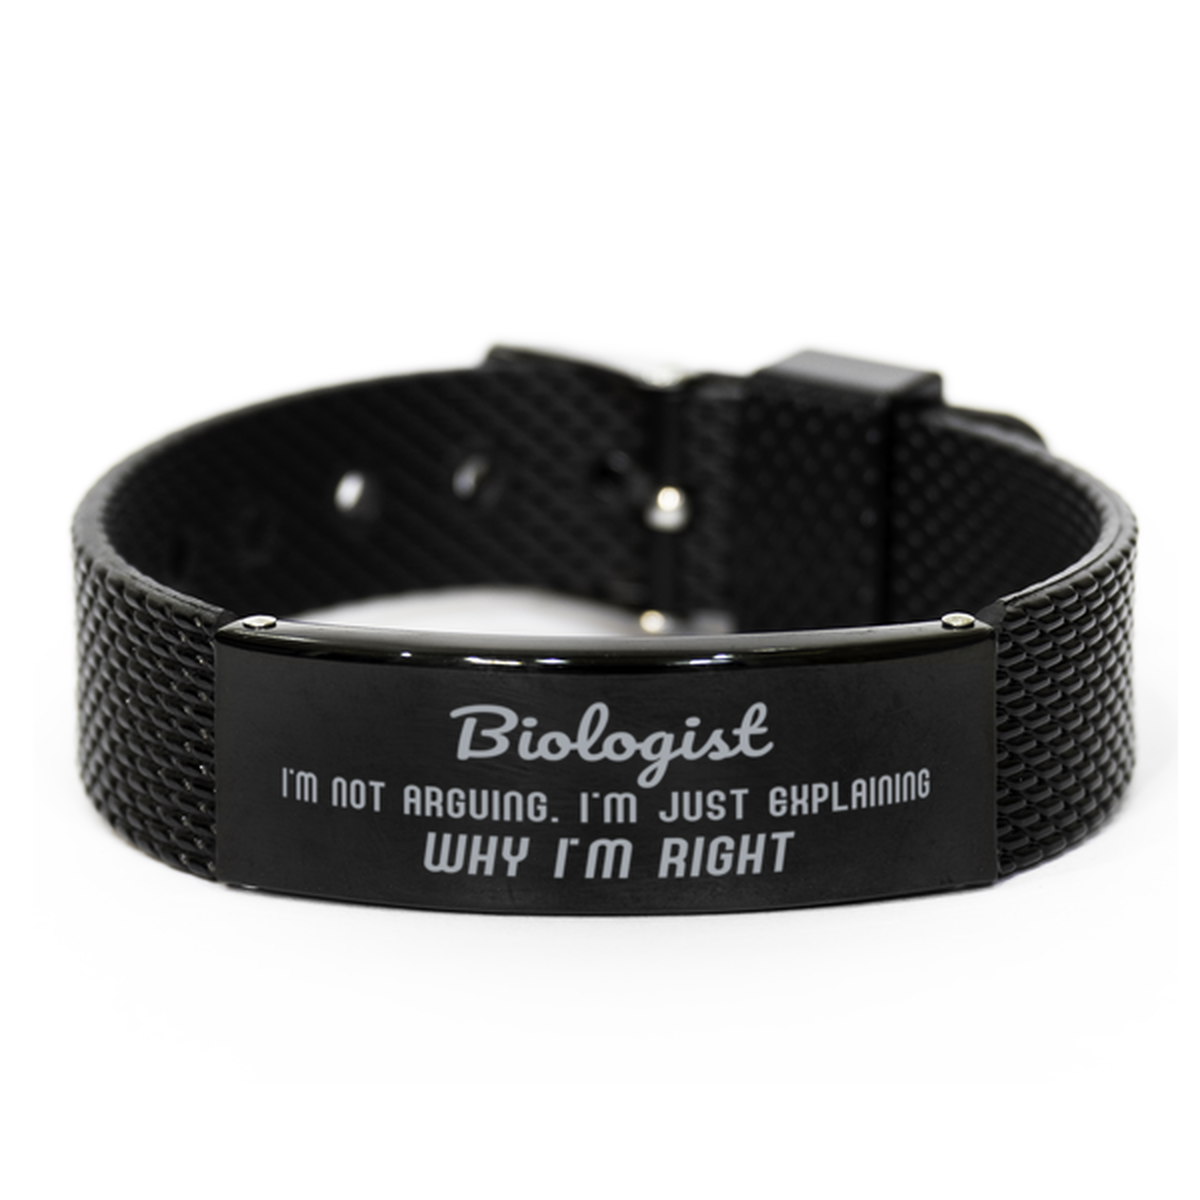 Biologist I'm not Arguing. I'm Just Explaining Why I'm RIGHT Black Shark Mesh Bracelet, Funny Saying Quote Biologist Gifts For Biologist Graduation Birthday Christmas Gifts for Men Women Coworker